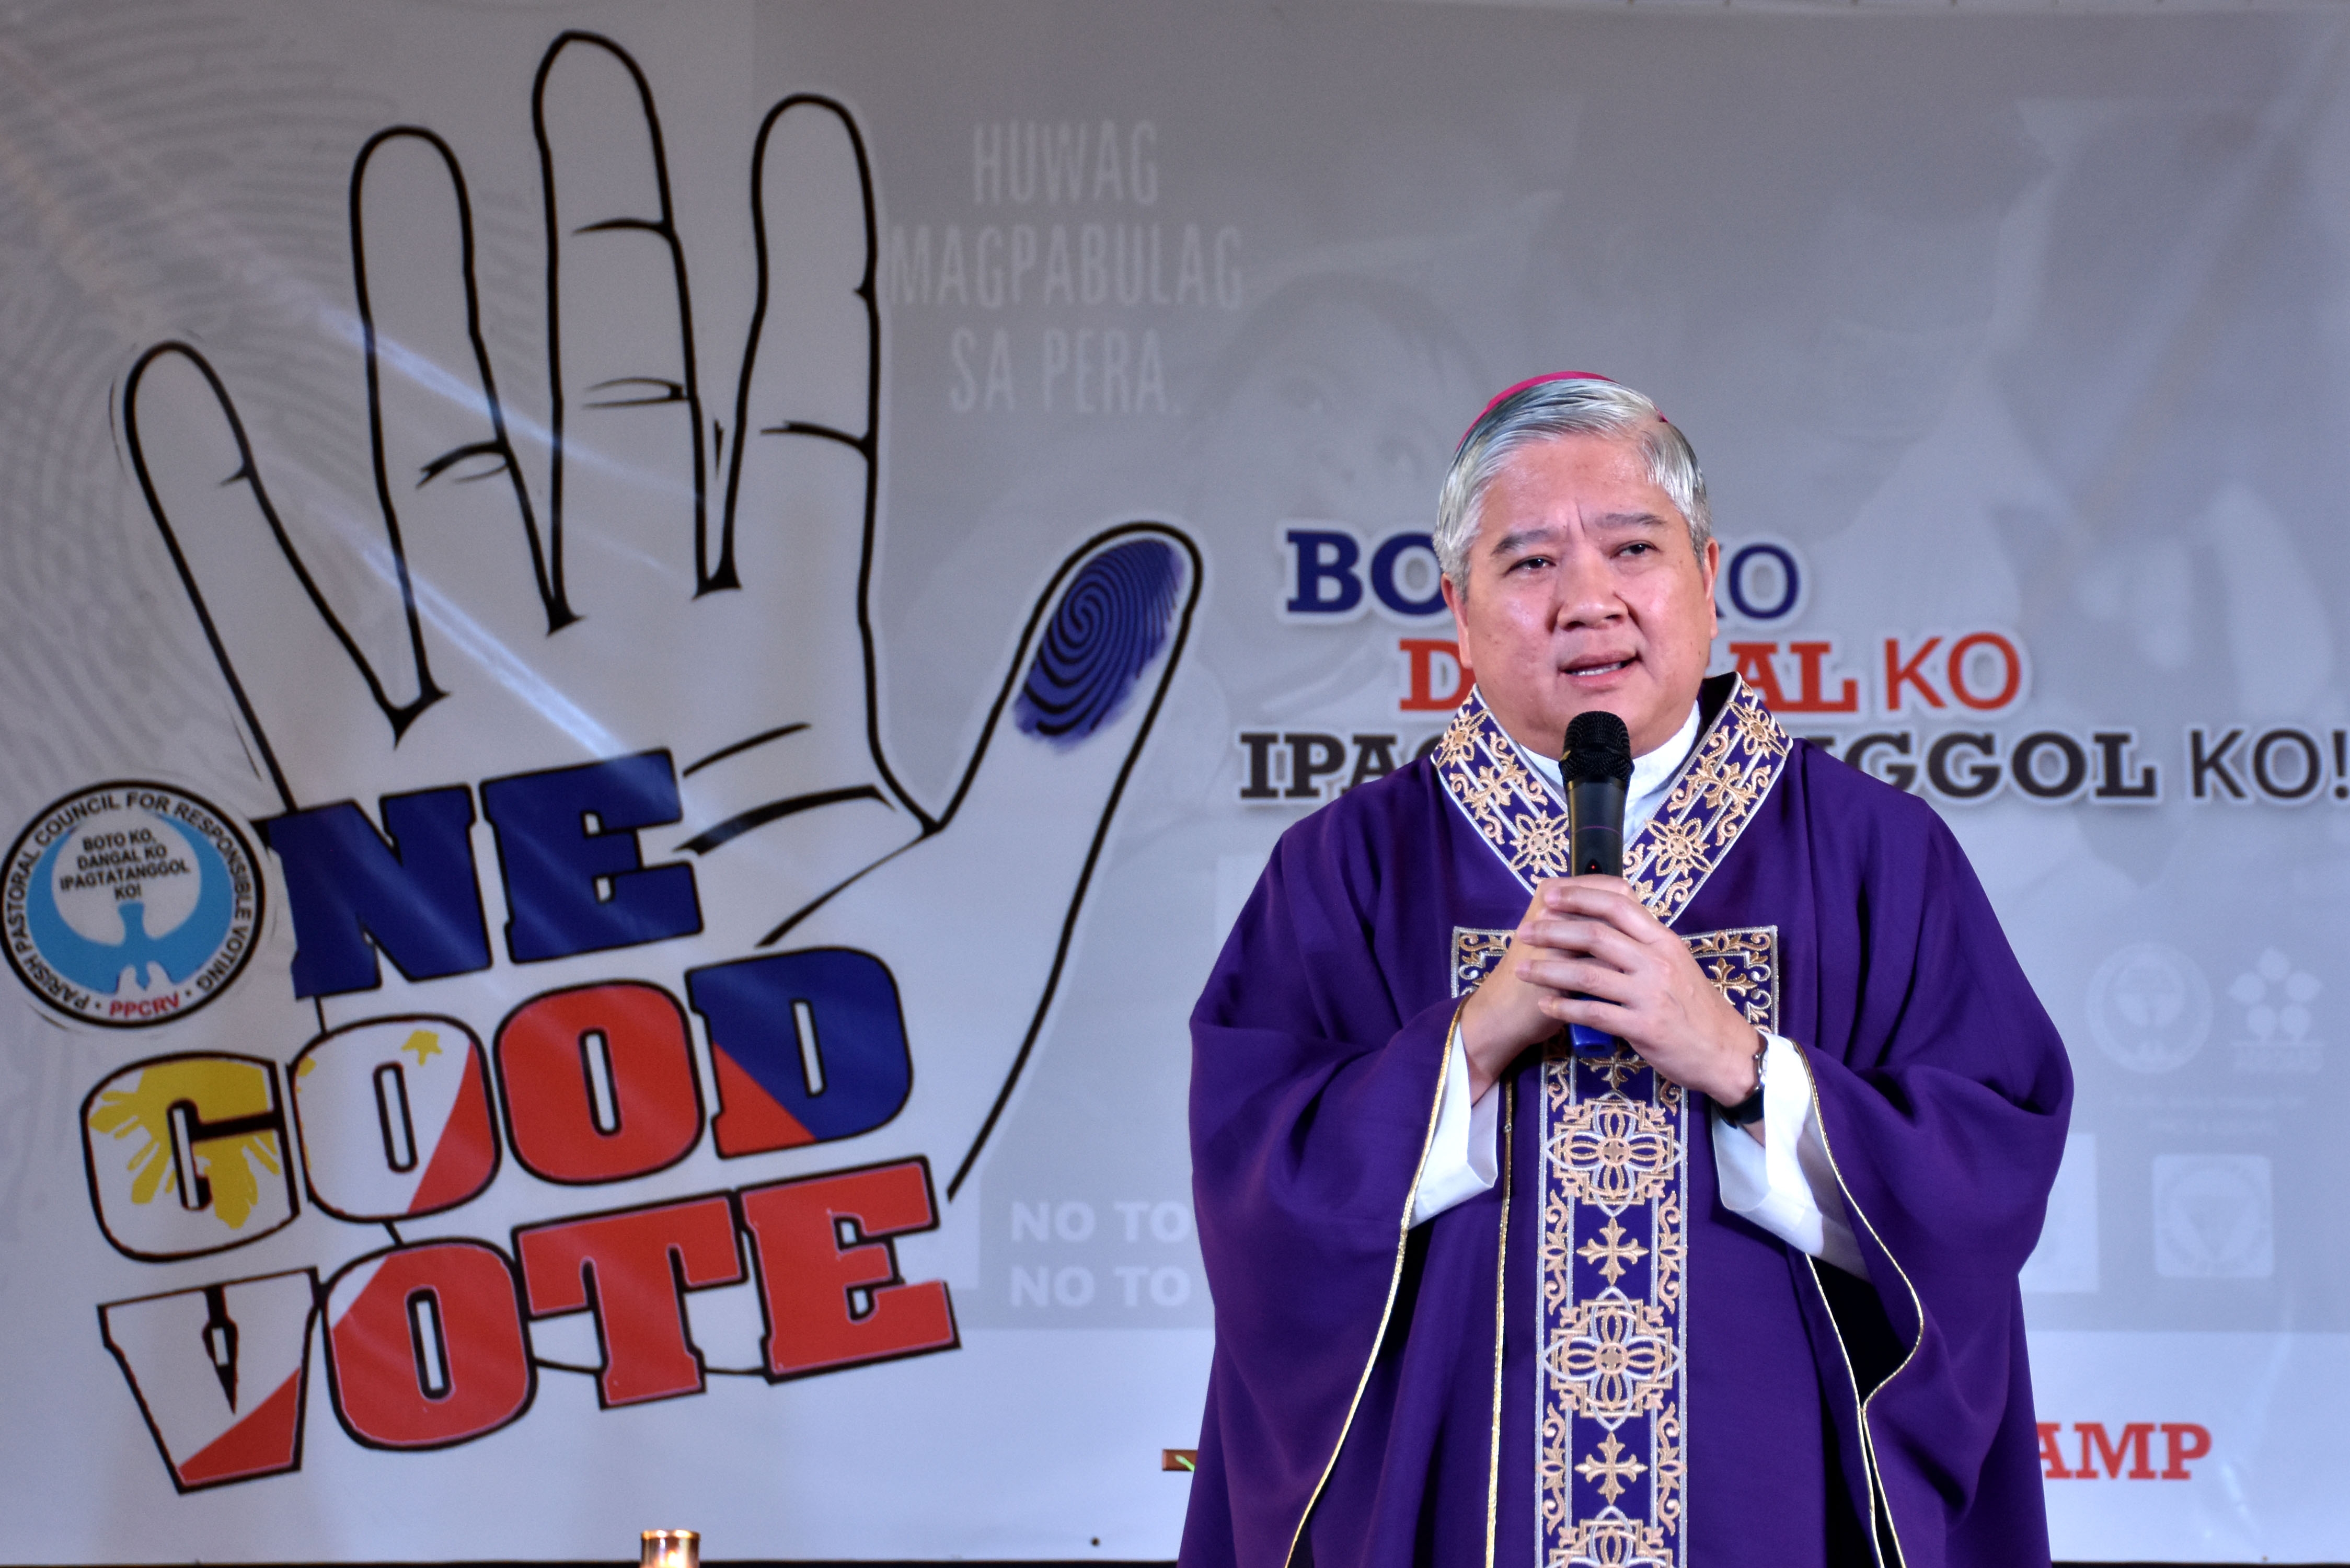 Bishop Villegas leads 'One Good Vote' campaign in Pangasinan